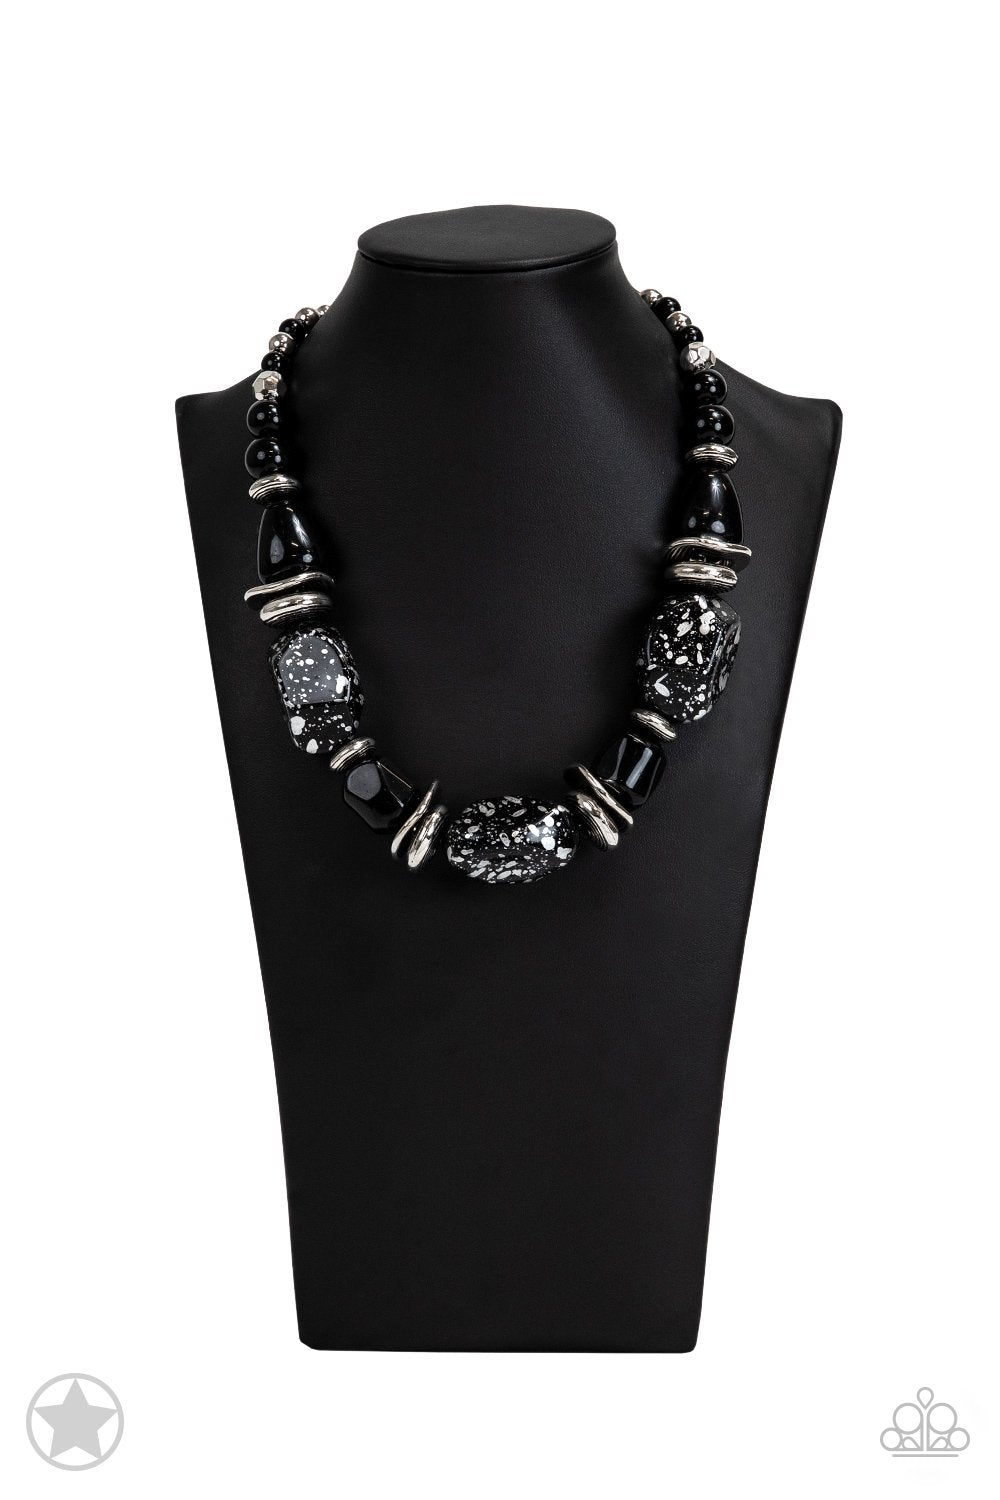 In Good Glazes Chunky Black Necklace and matching Earrings - Paparazzi Accessories- on bust -CarasShop.com - $5 Jewelry by Cara Jewels